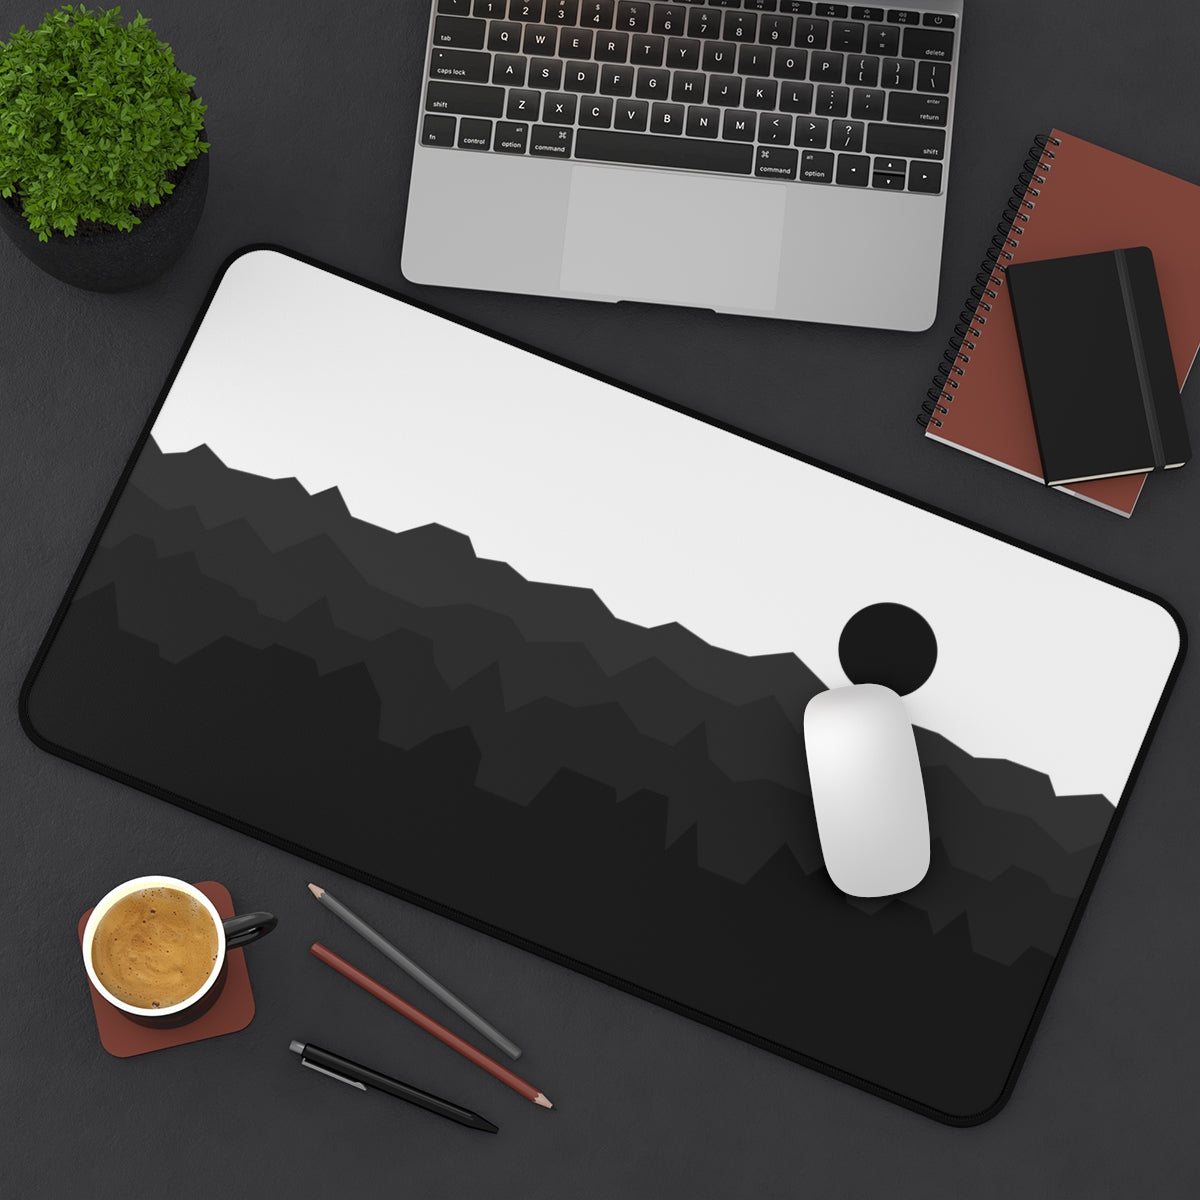 Black & White Abstract Mountains Desk Mat - Desk Cookies